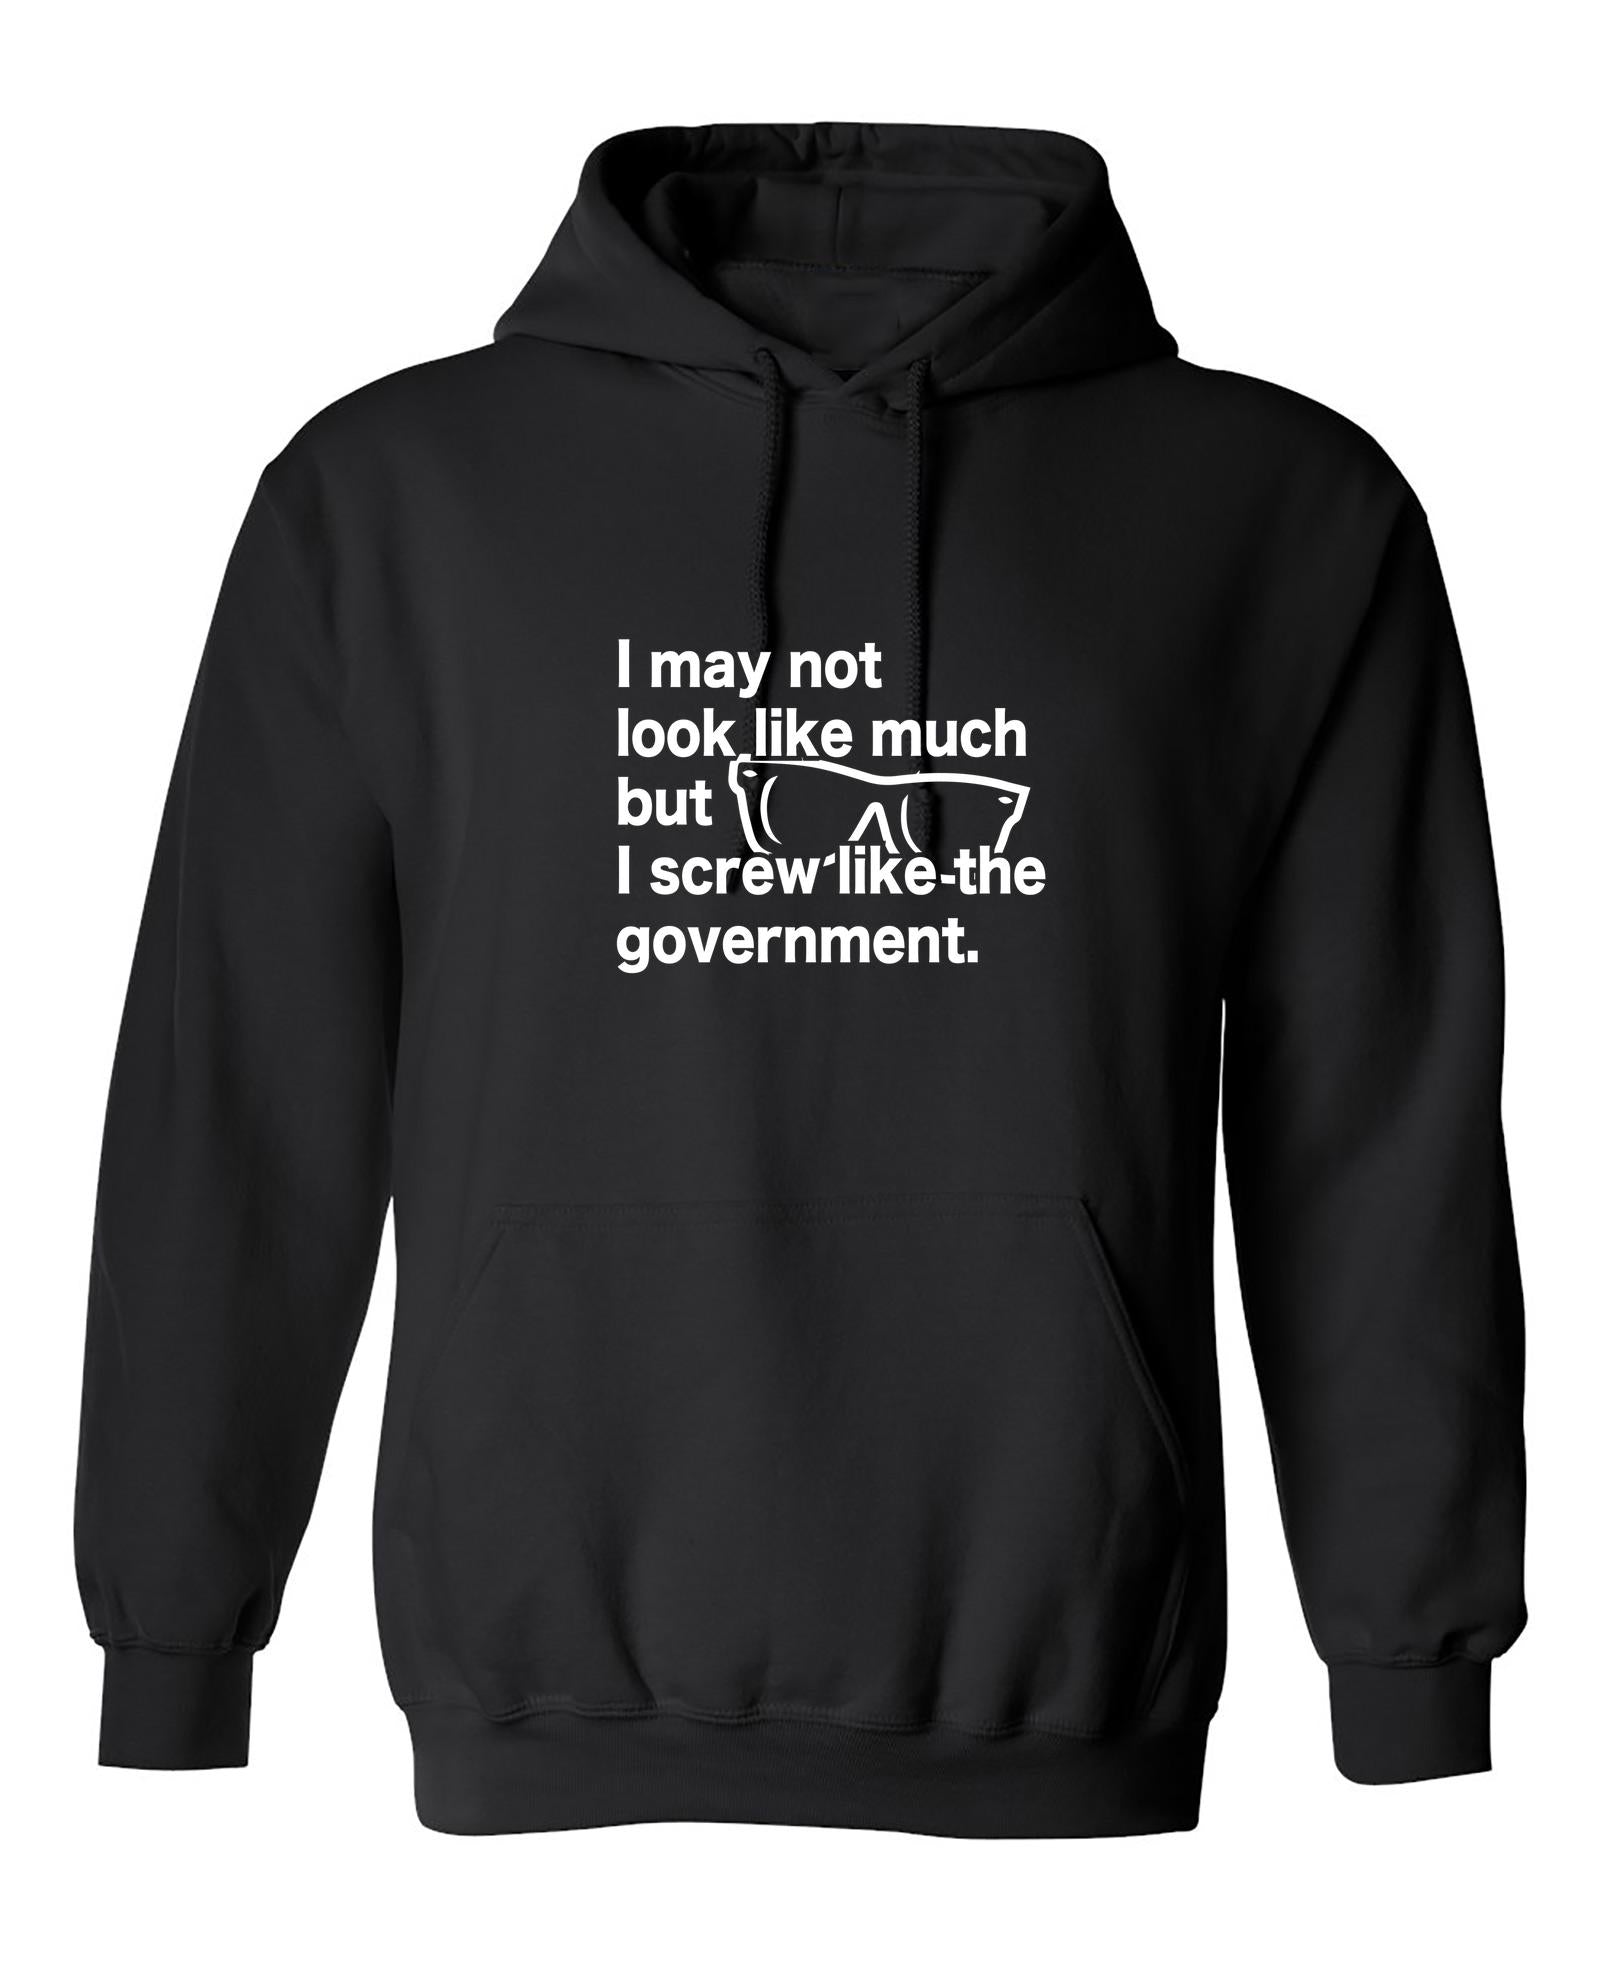 Funny T-Shirts design "I May Not Look Like Much But I Screw Like The Government"